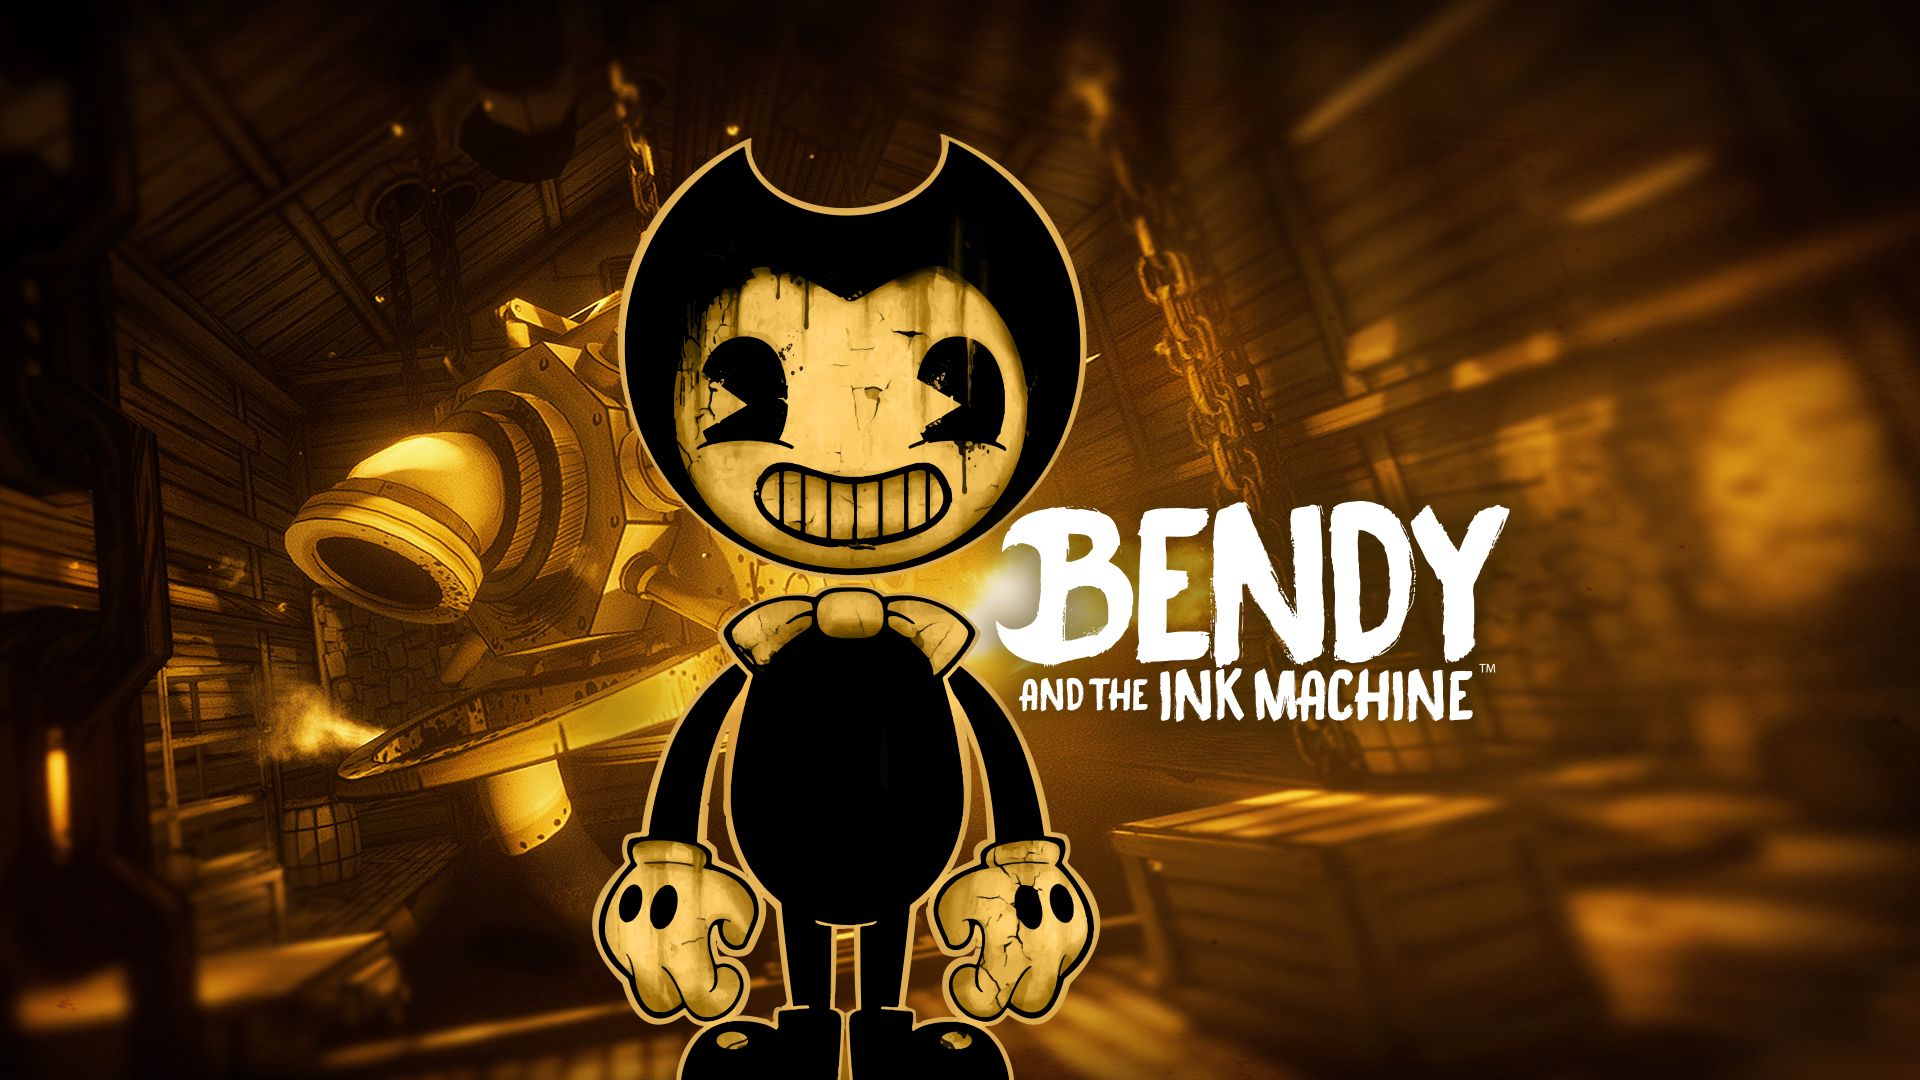 Bendy and the Ink Machine for Nintendo Switch Game Details